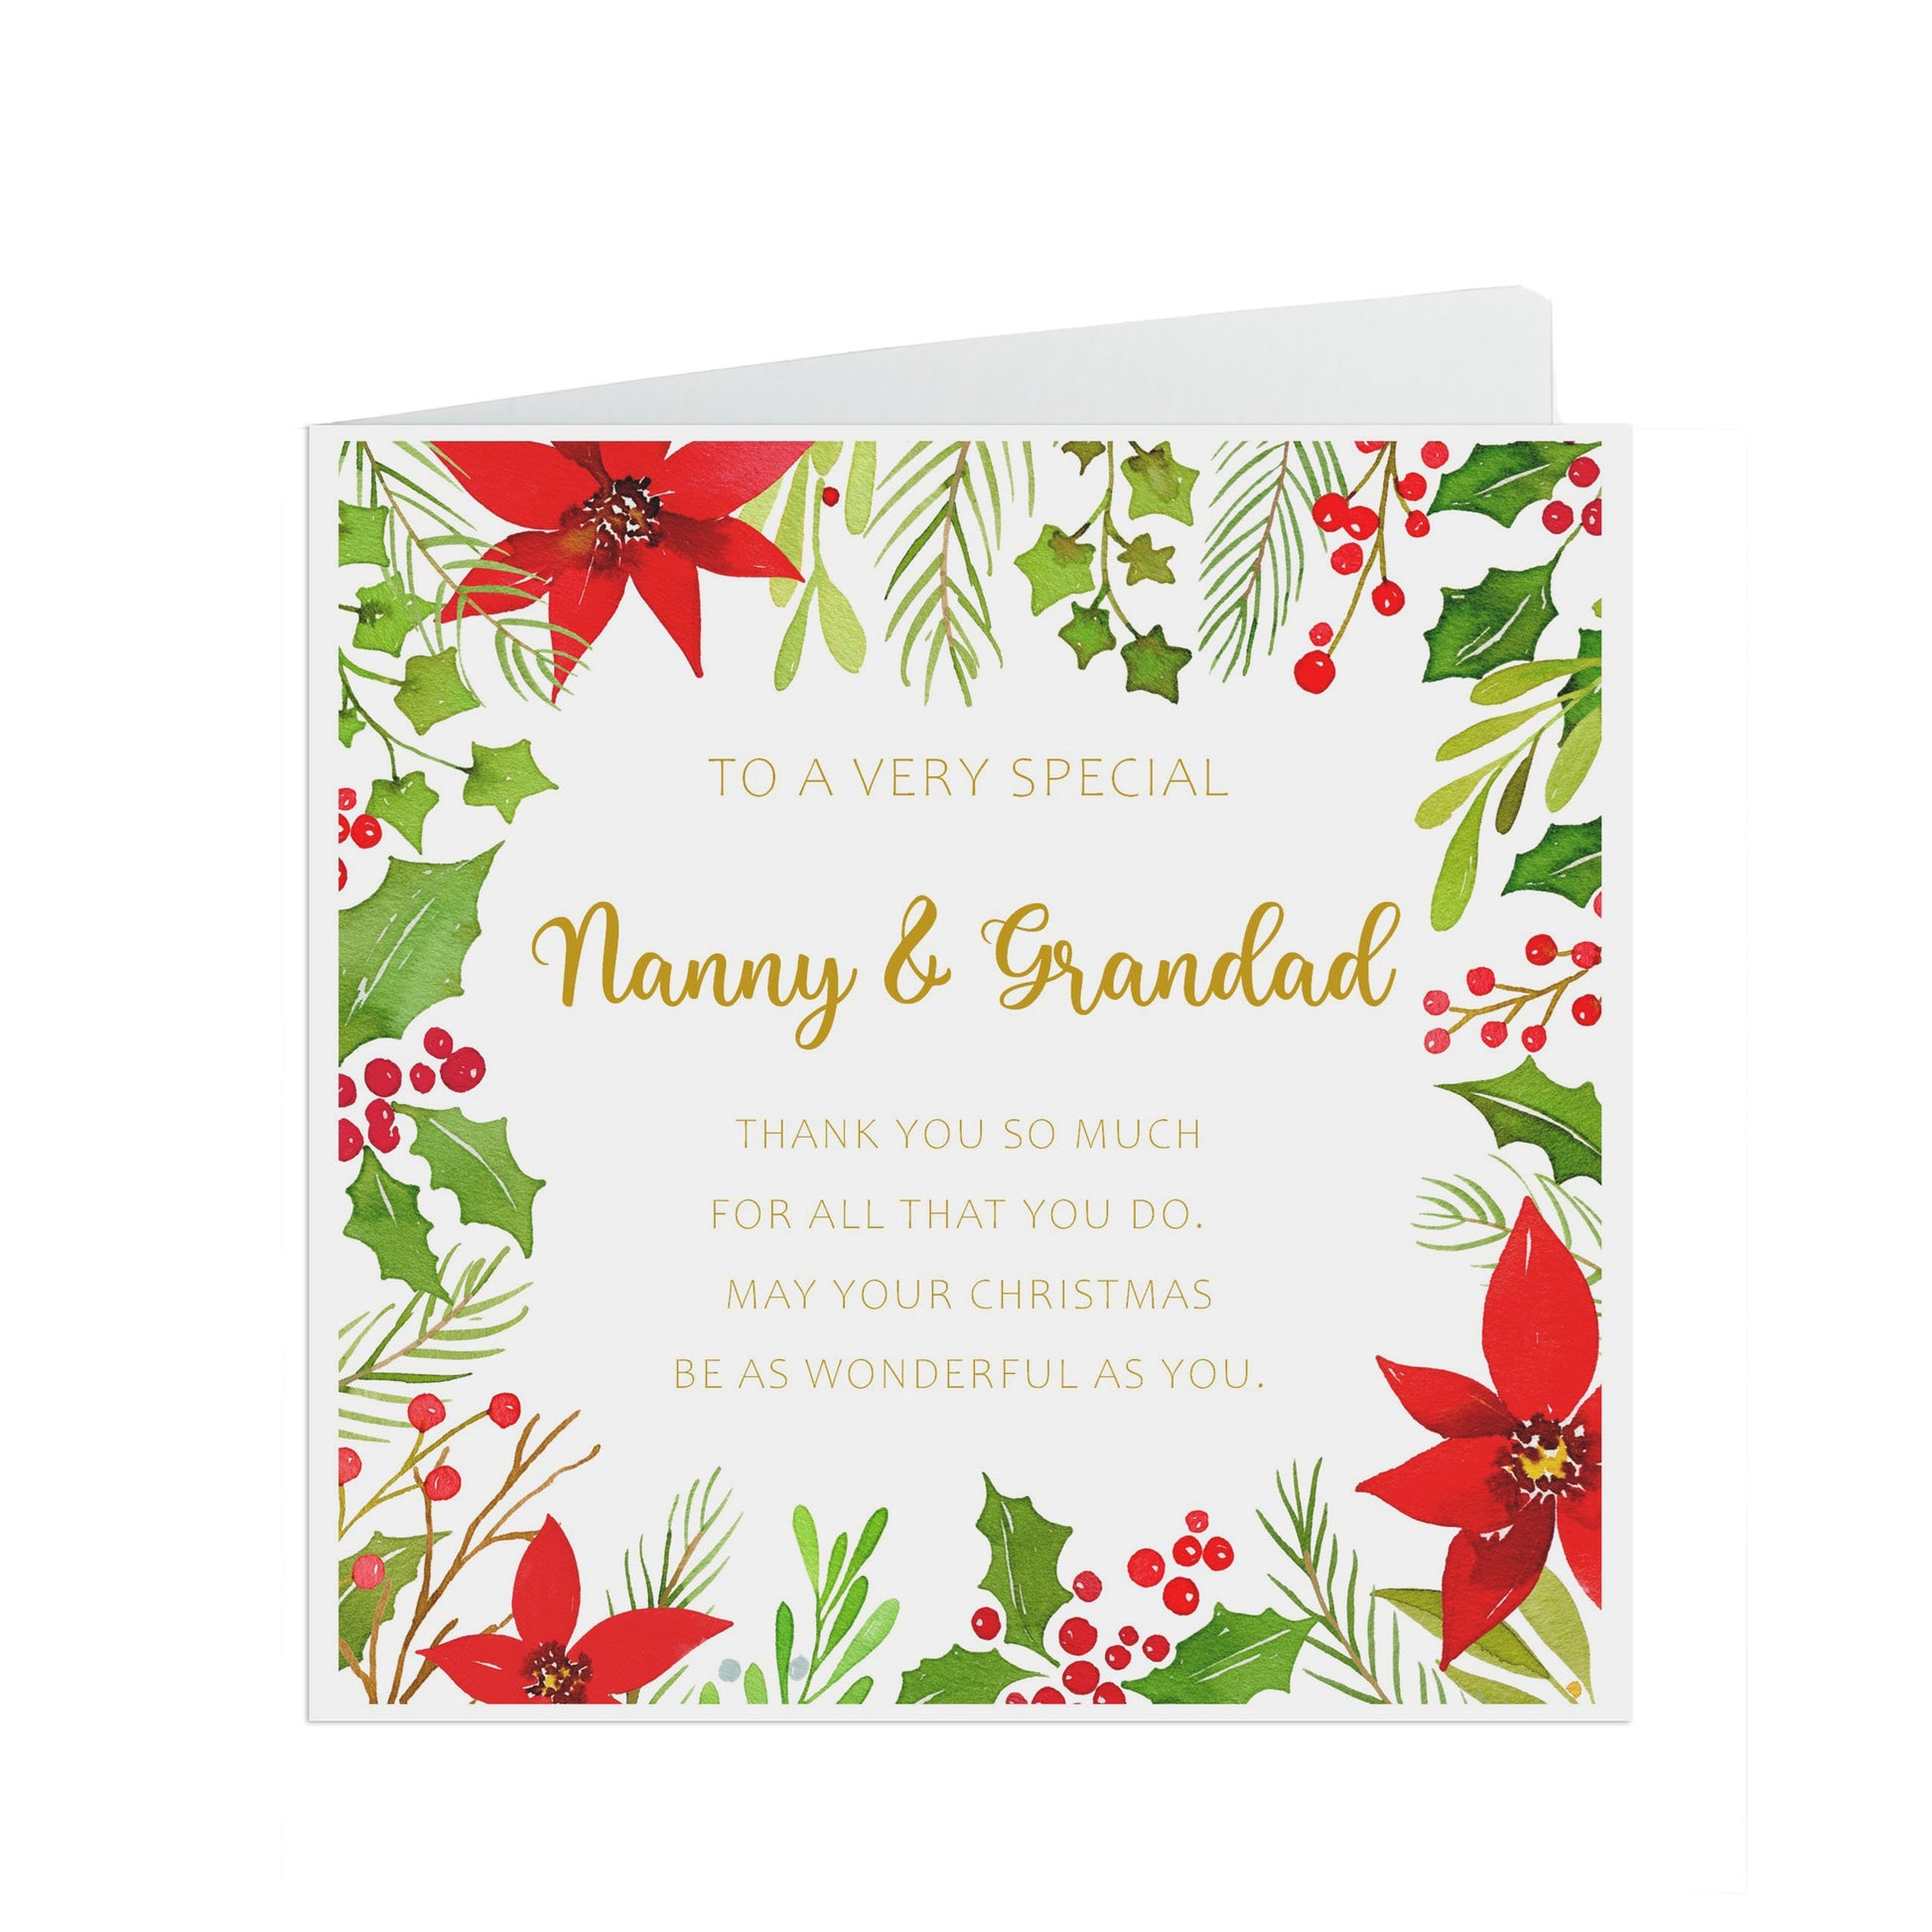 Traditional Christmas Card For Nanny And Grandad, Christmas Card From Grandson Or Granddaughter